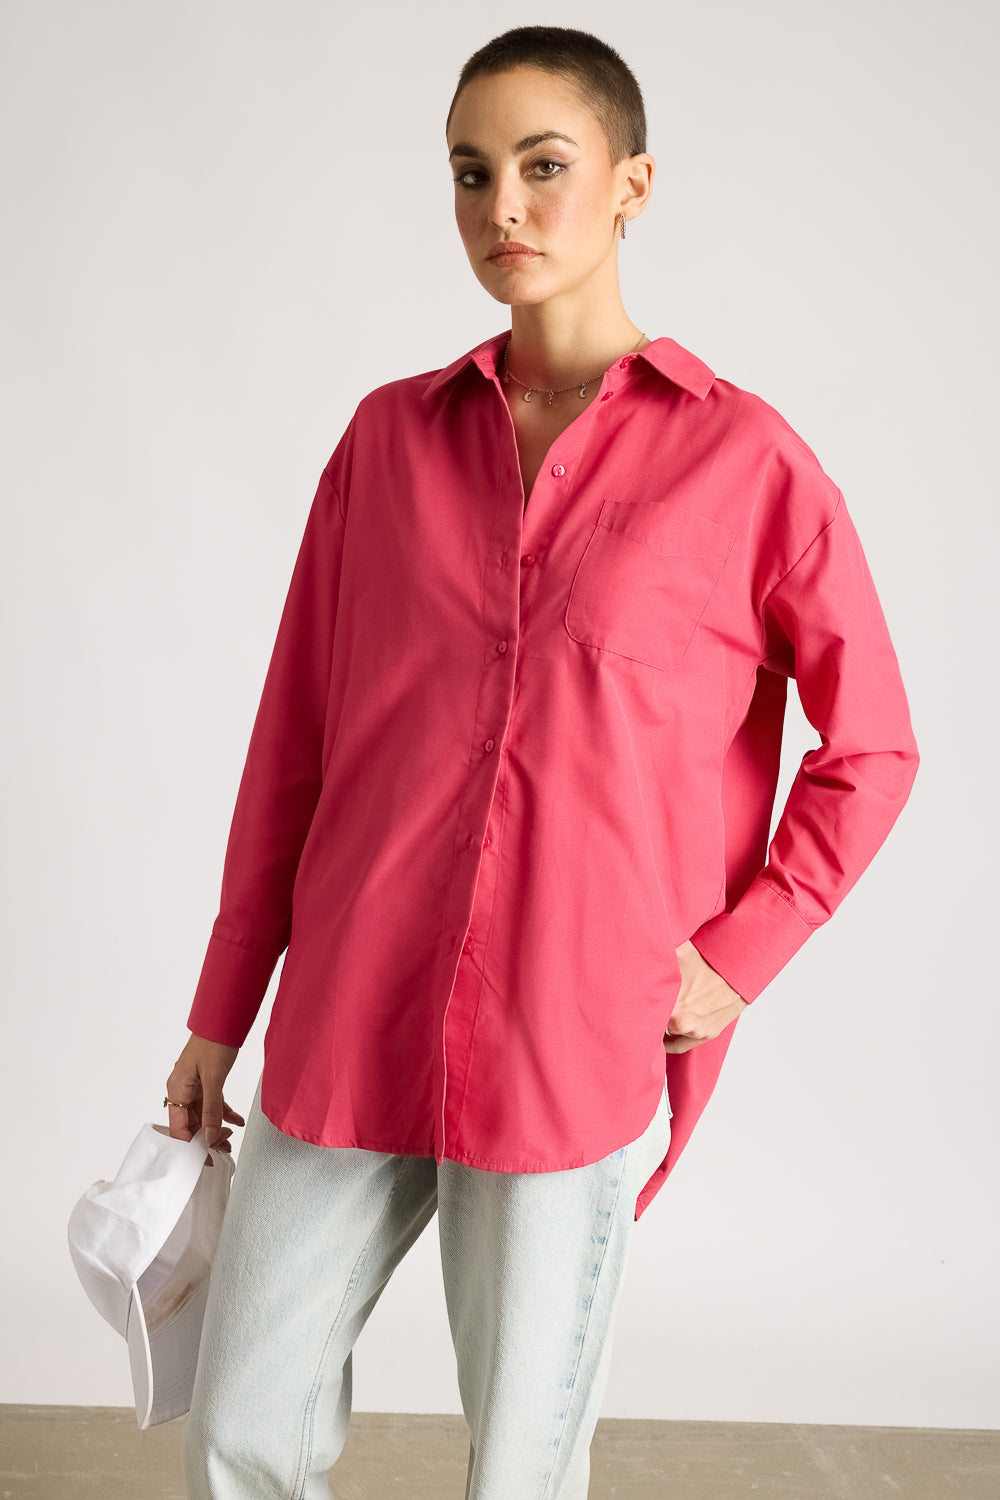 Relaxed Fit Cotton Women's Shirt- Pink